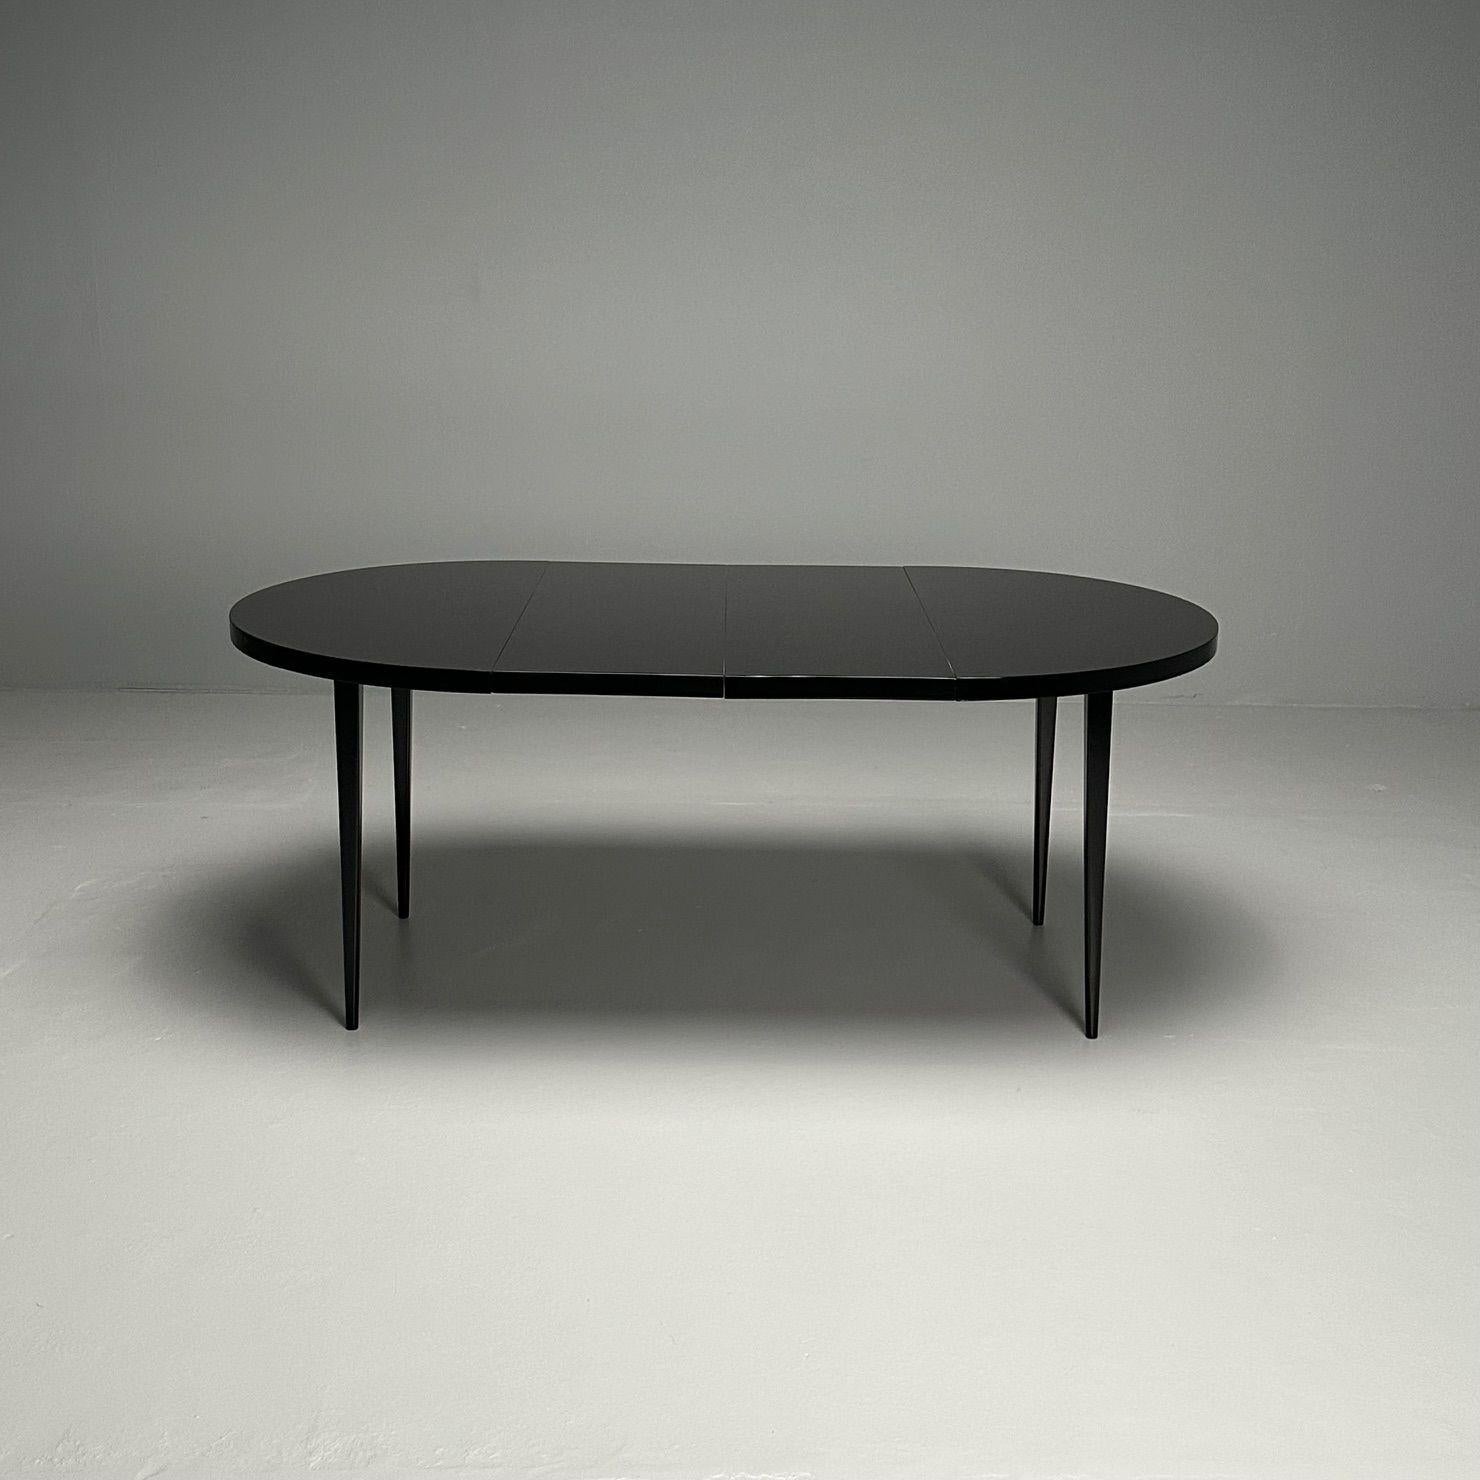 Paul McCobb, Mid-Century Modern Planner Group Dining Table, Black Lacquer, 1950s For Sale 1